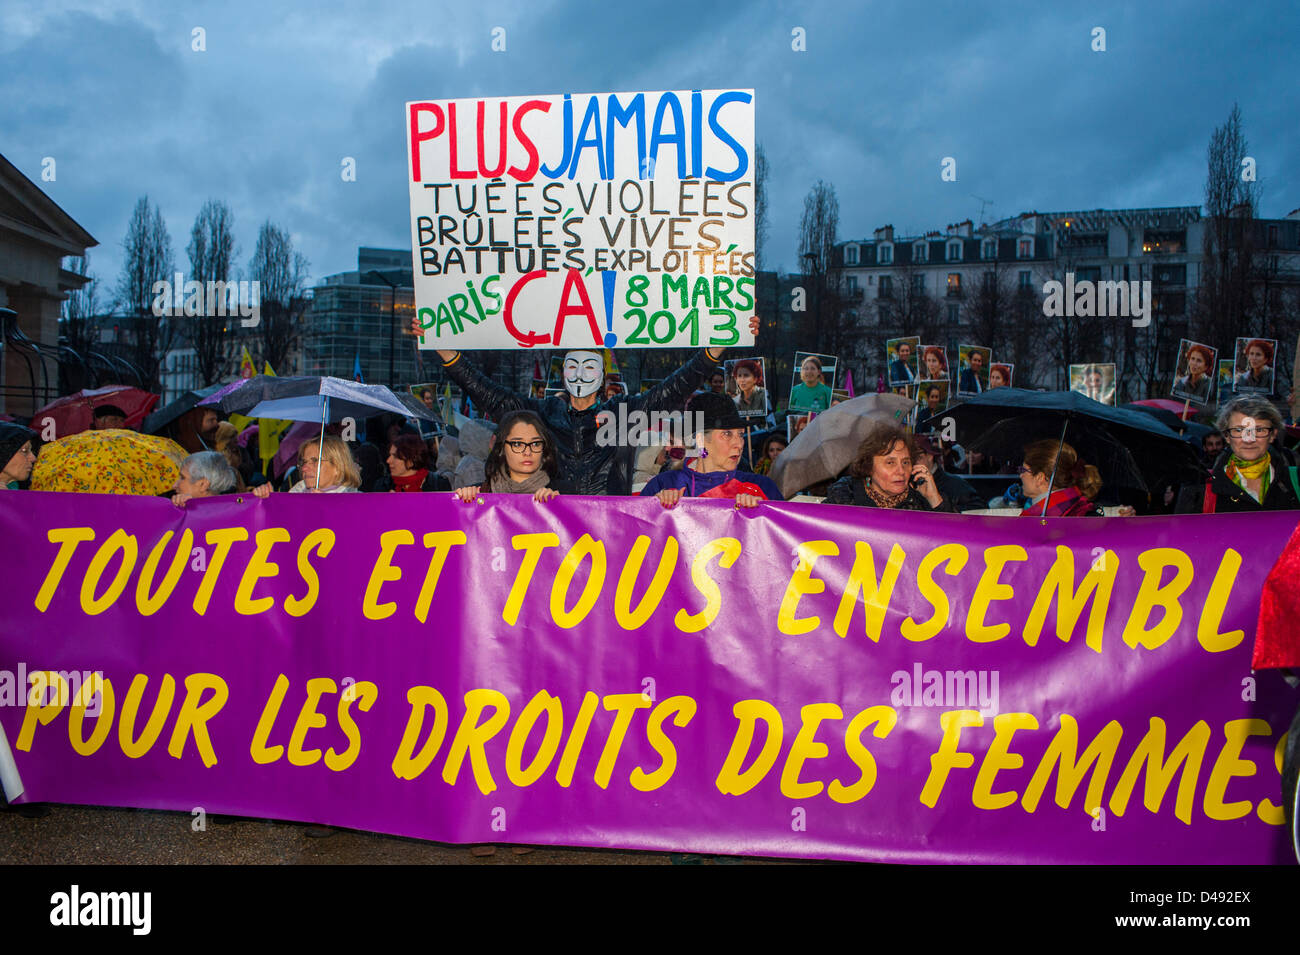 Paris, France. 8th of March, French Feminists Groups Marching in Annual  International Woman's Day Demonstration. Holding Protest Signs and Banners, equality women's rights march Stock Photo